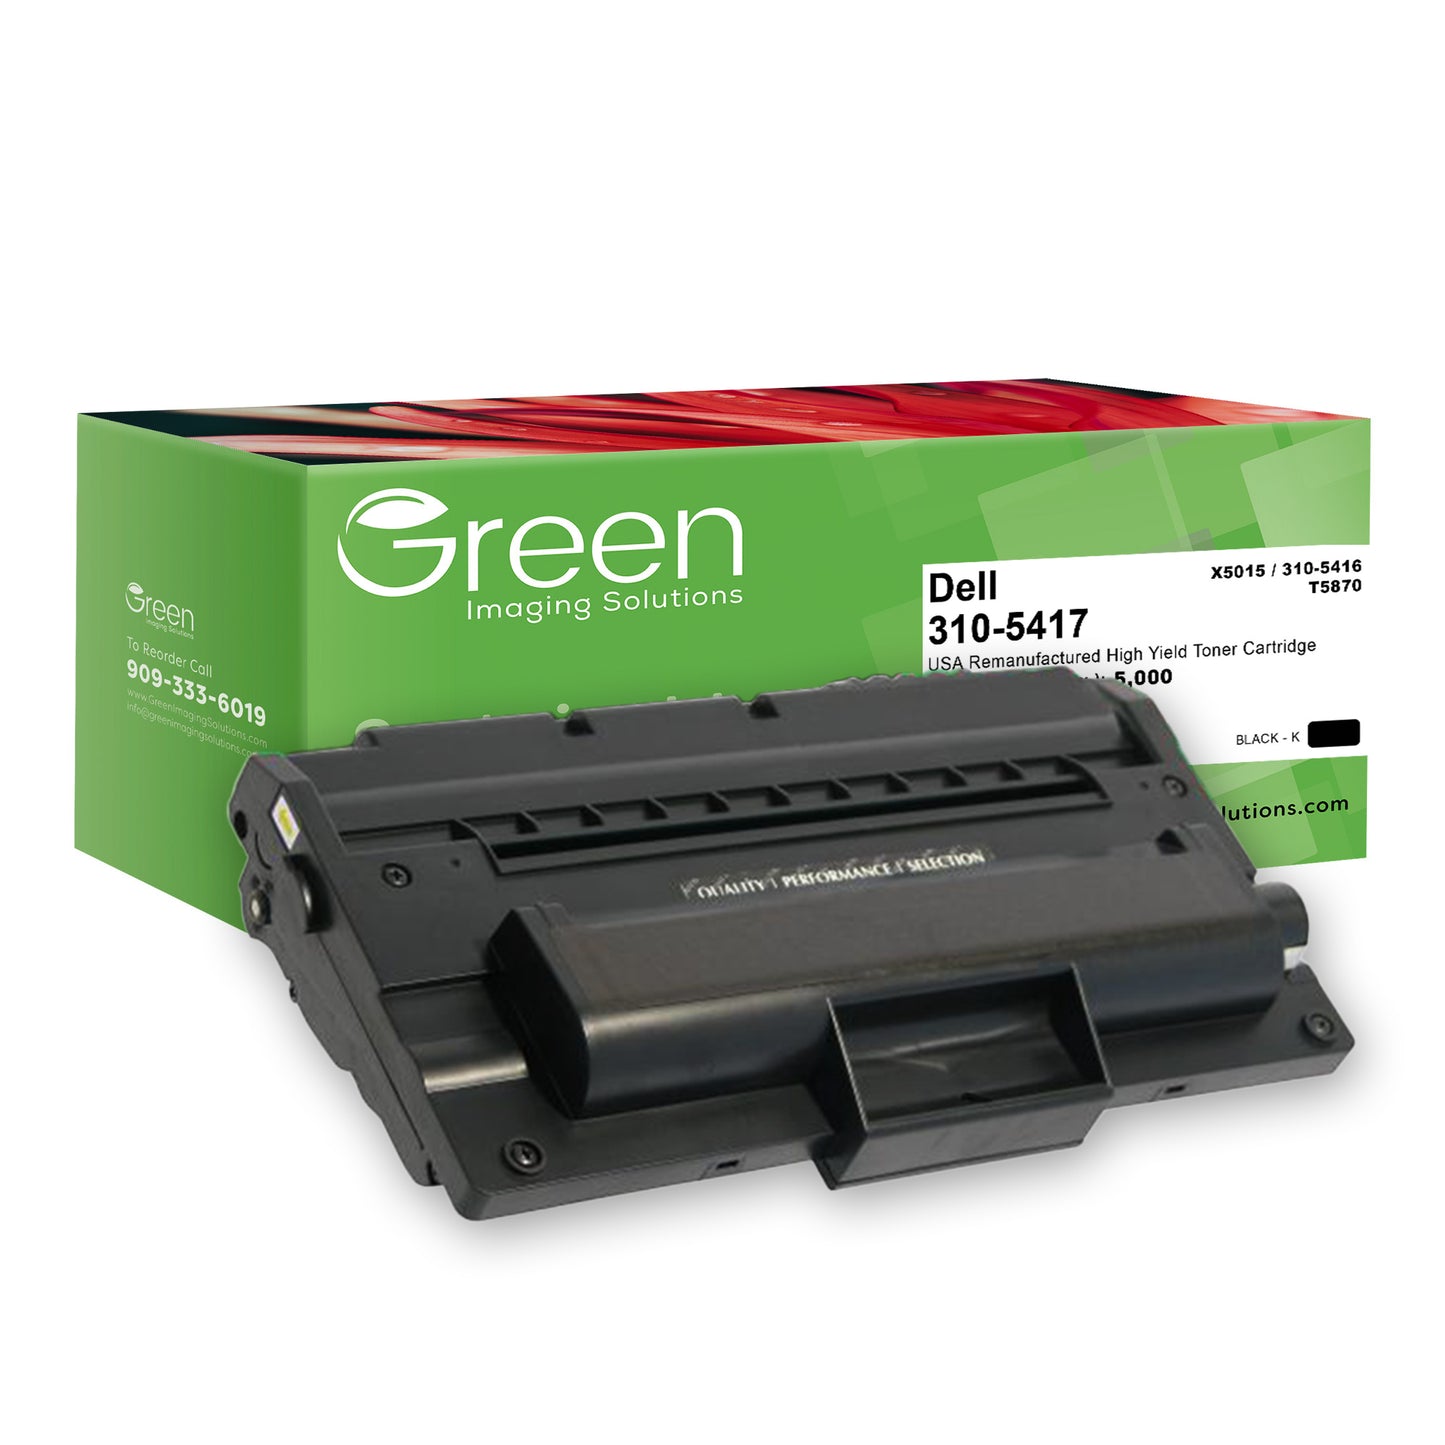 Green Imaging Solutions USA Remanufactured High Yield Toner Cartridge for Dell 1600